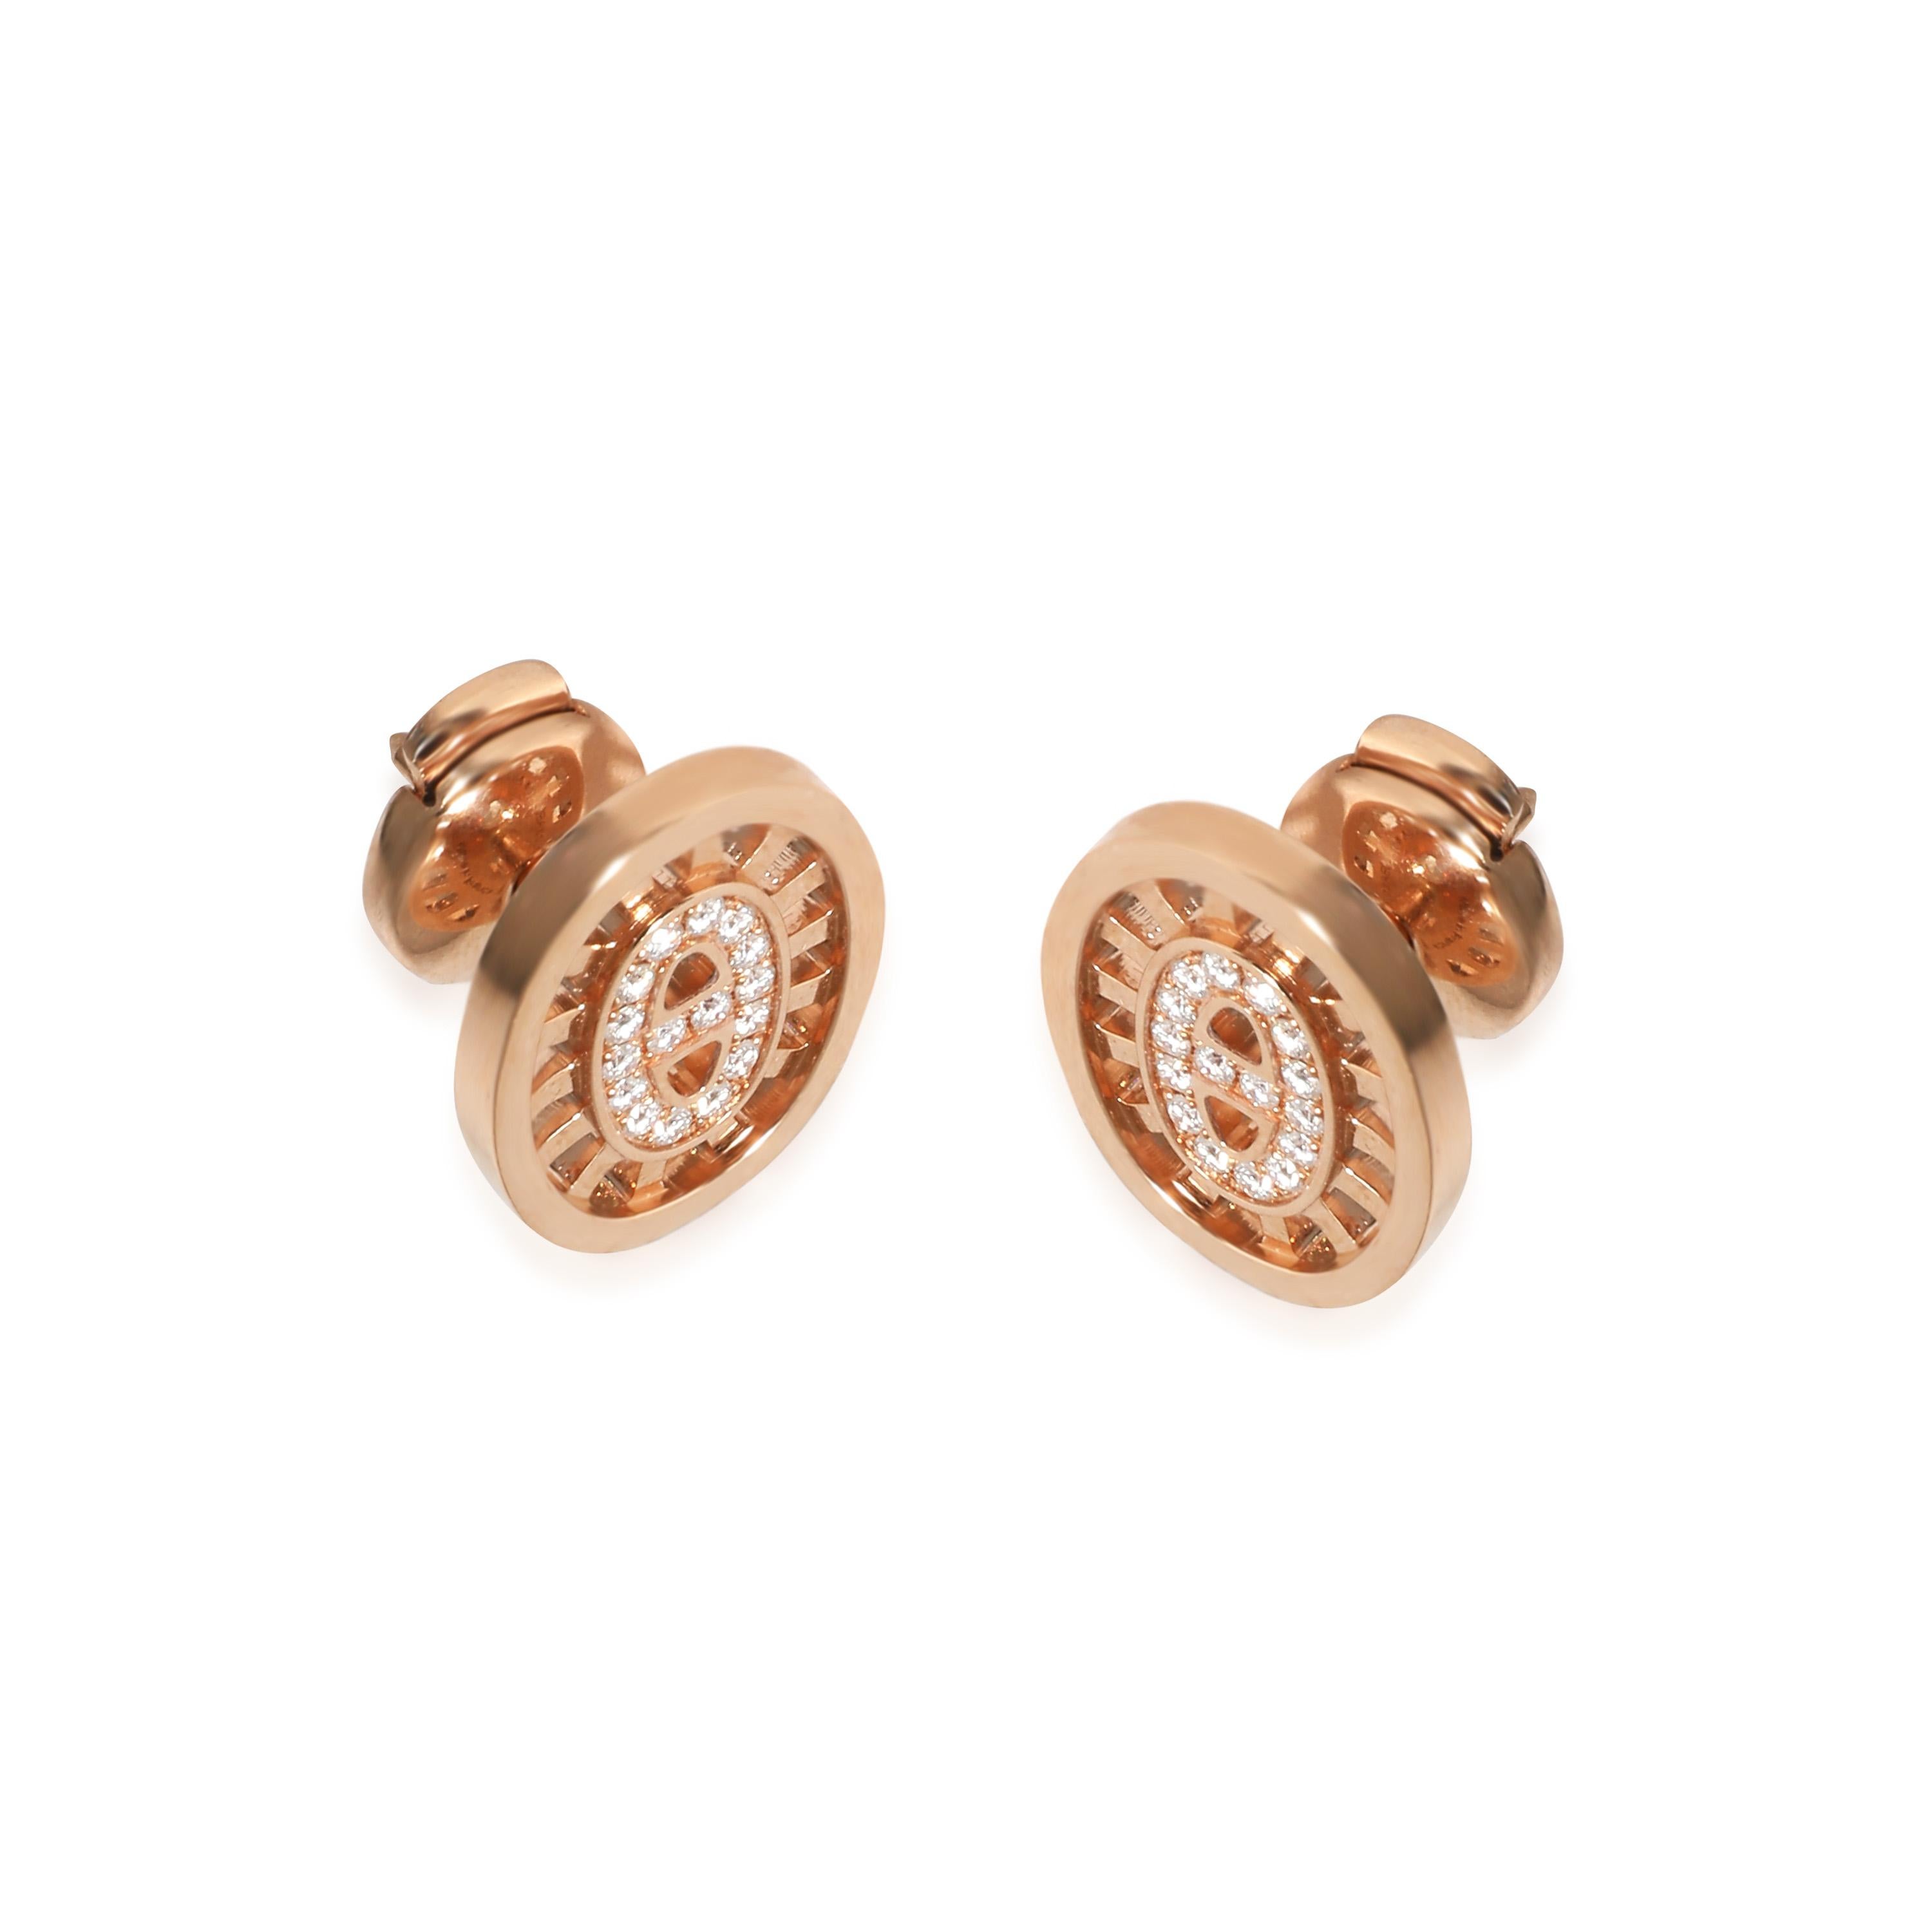 Hermès Chaine d'ancre Divine  Earrings in 18k Rose Gold 0.13 CTW In Excellent Condition For Sale In New York, NY